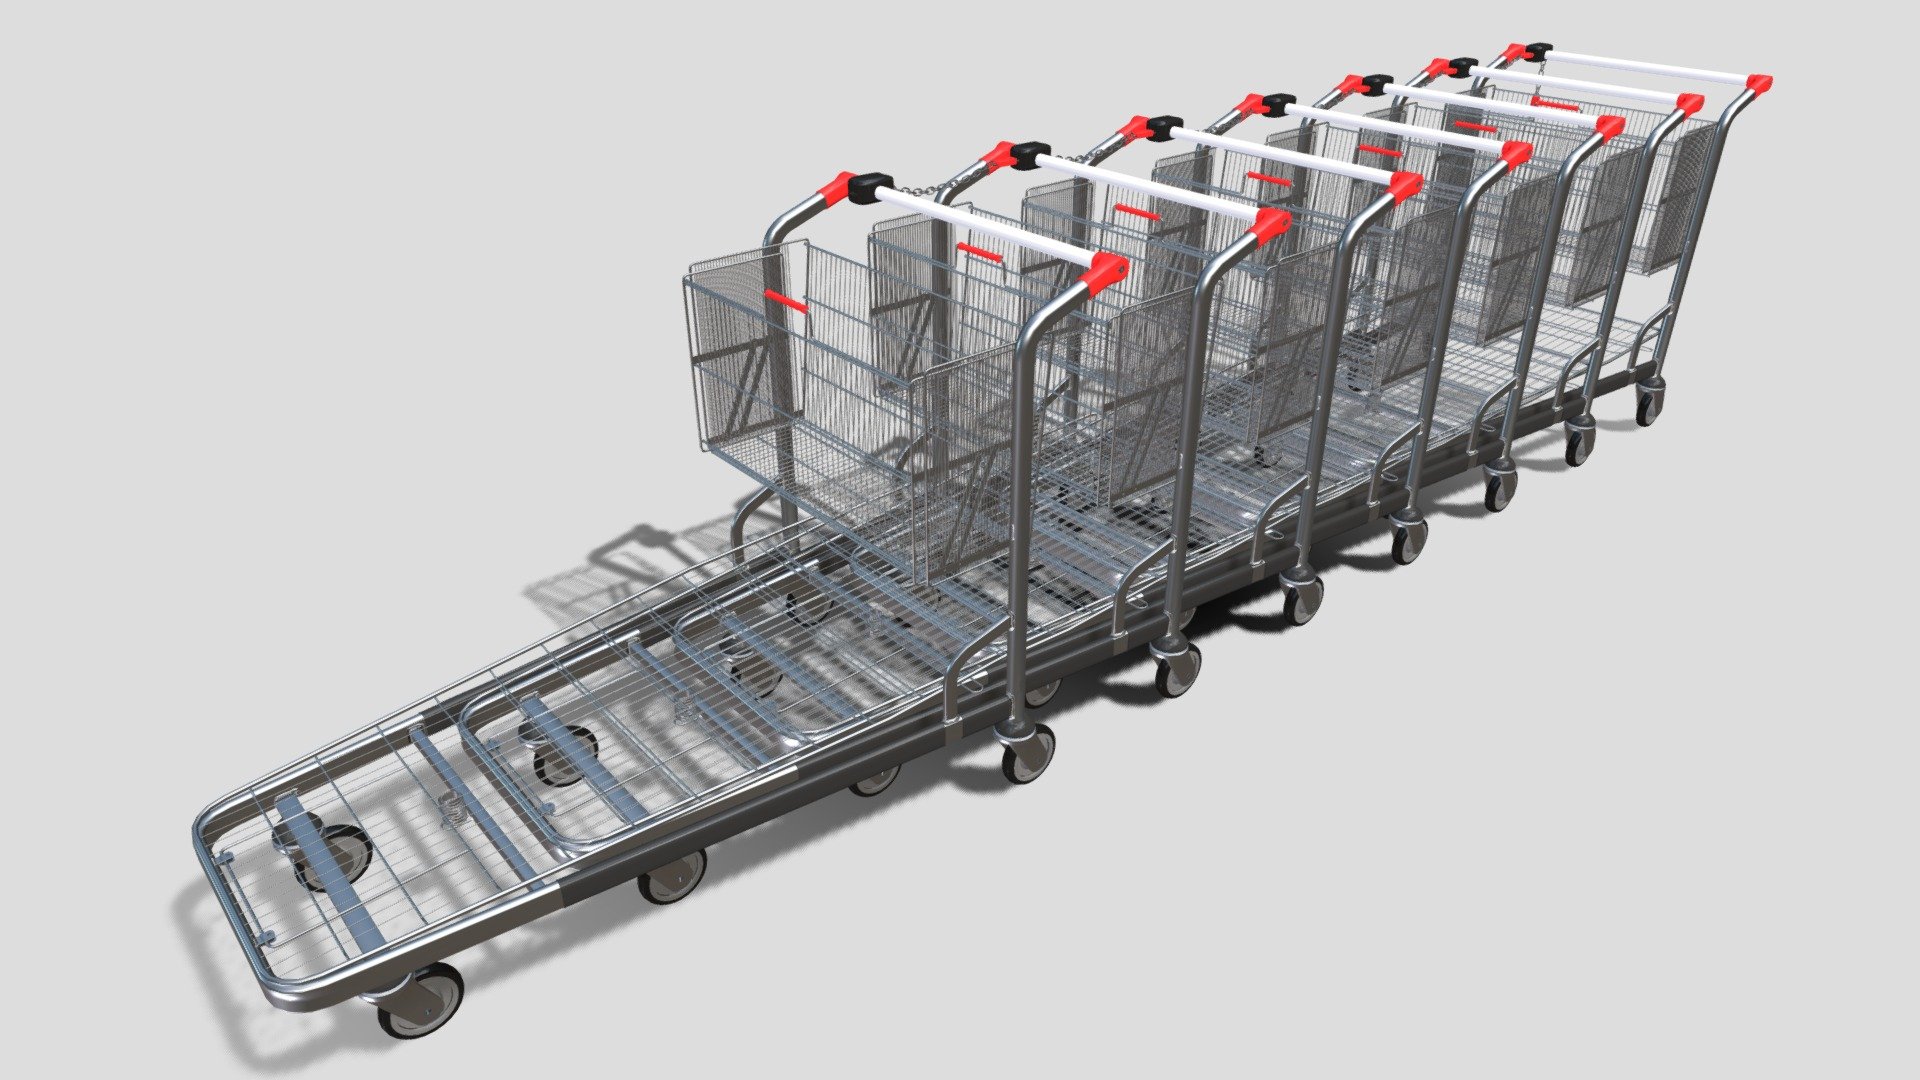 Shopping cart stack 3d model rendered with Cycles in Blender, as per seen on attached images. 
The model is scaled to real-life scale. Poly count is for one cart.

File formats:
-.blend, rendered with cycles, as seen in the images;
-.obj, with materials applied;
-.dae, with materials applied;
-.fbx, with material slots applied;
-.stl;

Three sets of files are provided, one with the basket open and one with it closed, and one with the stack.
Files come named appropriately and split by file format.

3D Software:
The 3D model was originally created in Blender 2.8 and rendered with Cycles.

Materials and textures:
PBR material is being used, consisting of five 4k image textures (Base/Disp/Metallic/Normal/Roughness). 
Certain 3d softwares can possibly need texture re-assigning in order to get the proper material effect.

Preview scenes:
The preview images are rendered in Blender using its built-in render engine &lsquo;Cycles' 3d model